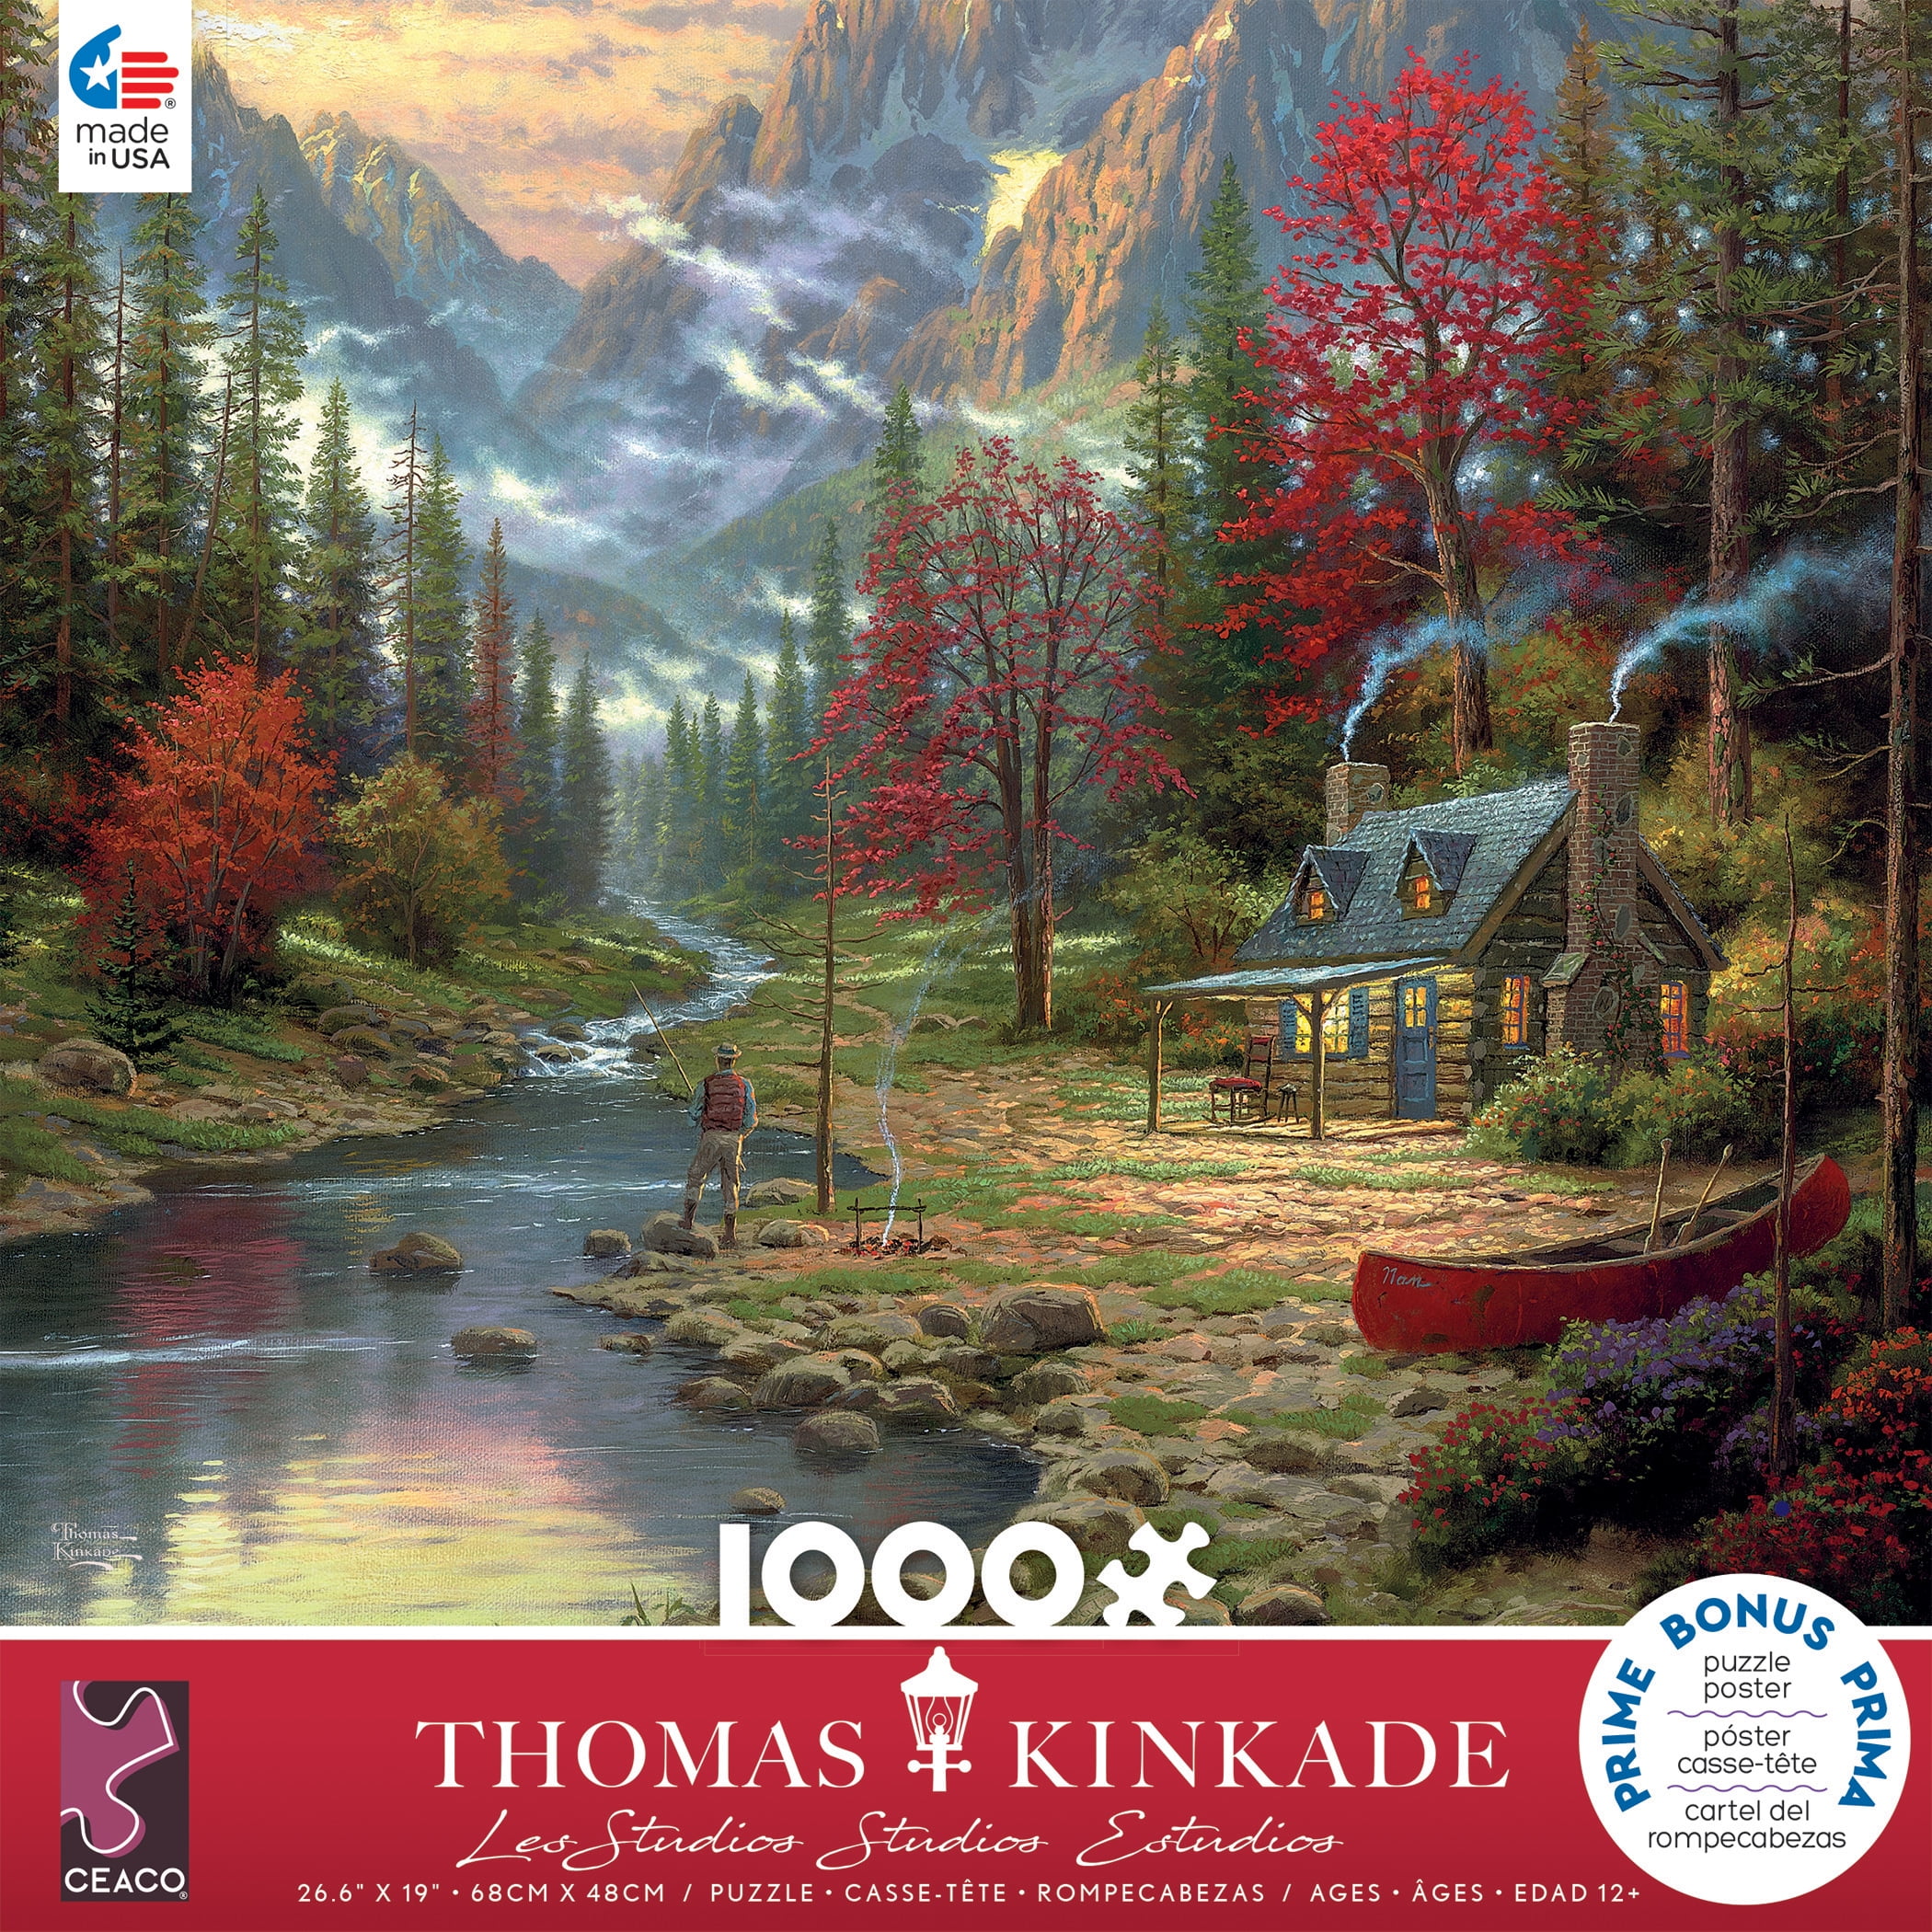 Ceaco Thomas Kinkade The Valley of Peace Jigsaw Puzzle 1000 Piece for sale online 